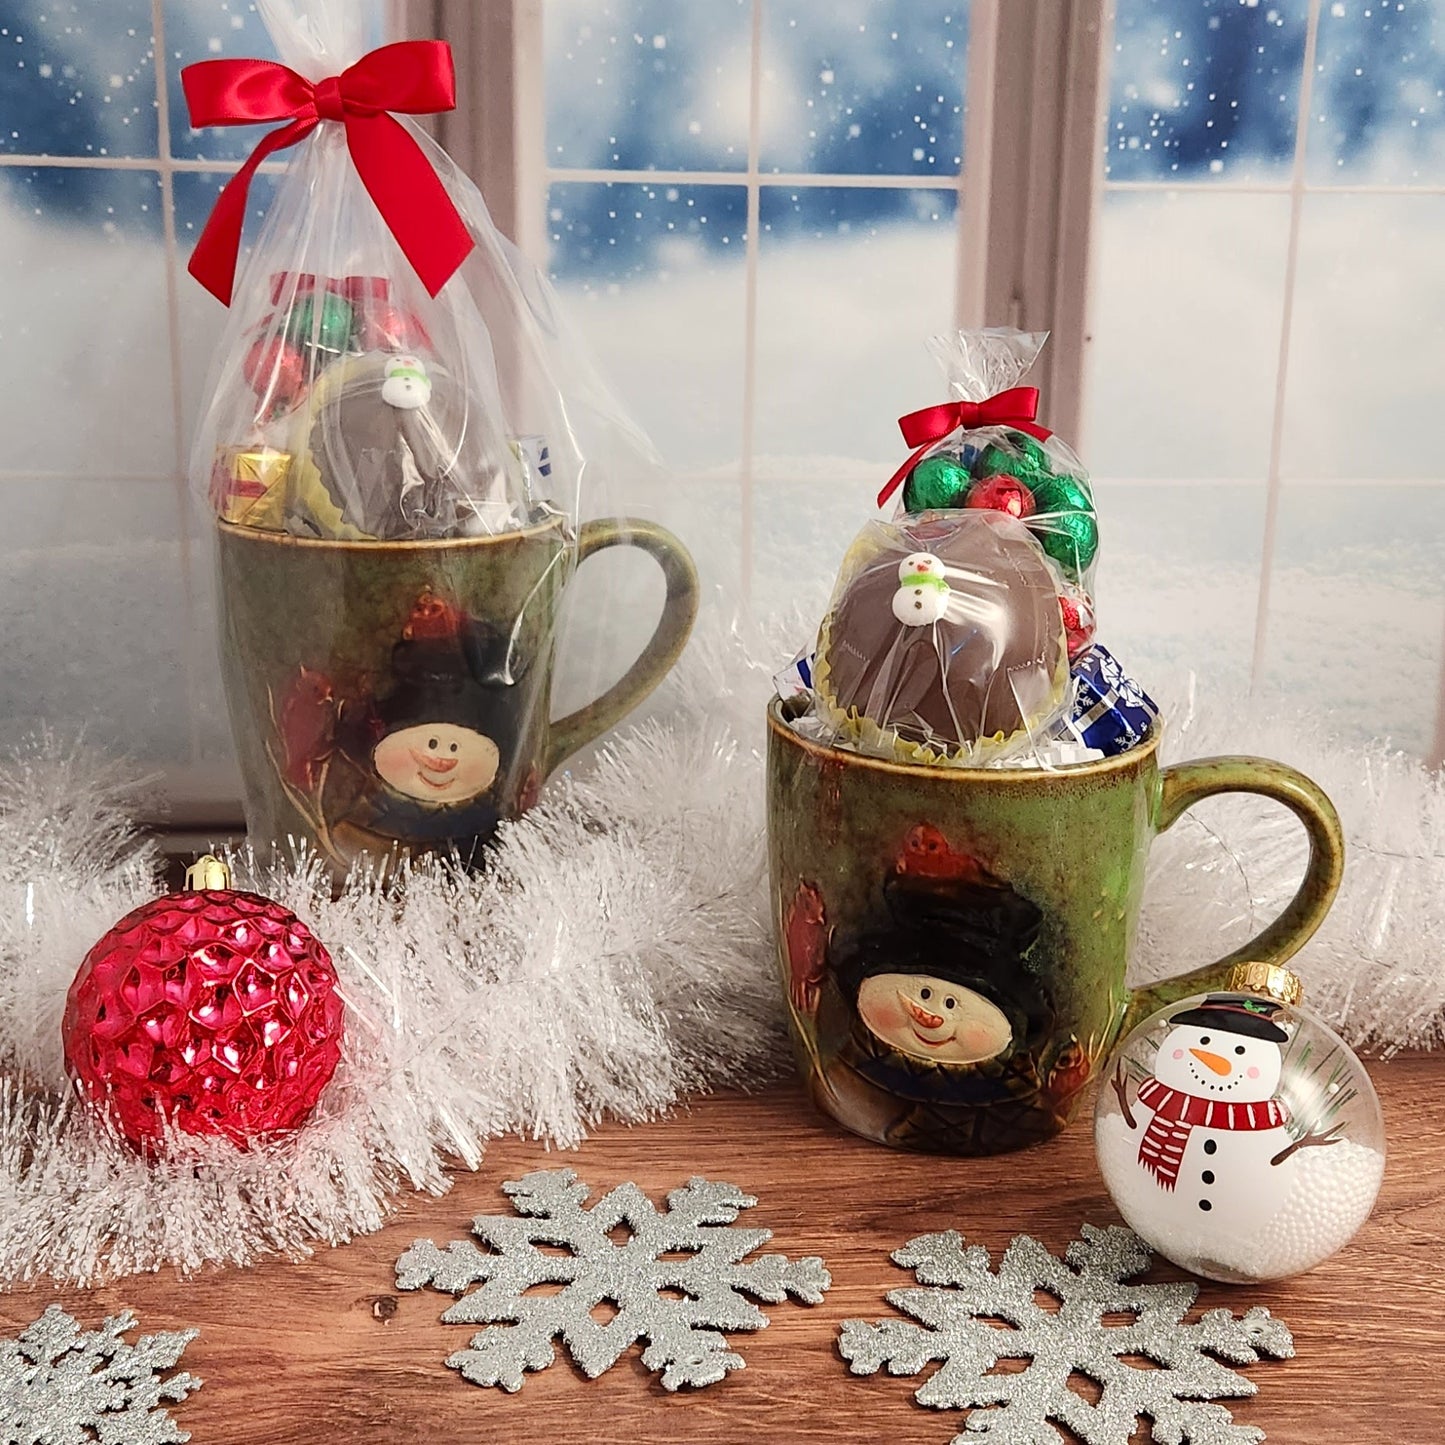 Snowman Stoneware Mug filled with 4 oz. Milk Chocolate Foiled Ornaments and a Hot Cocoa Bomb - Perfect for warming up by the fire during the holidays!